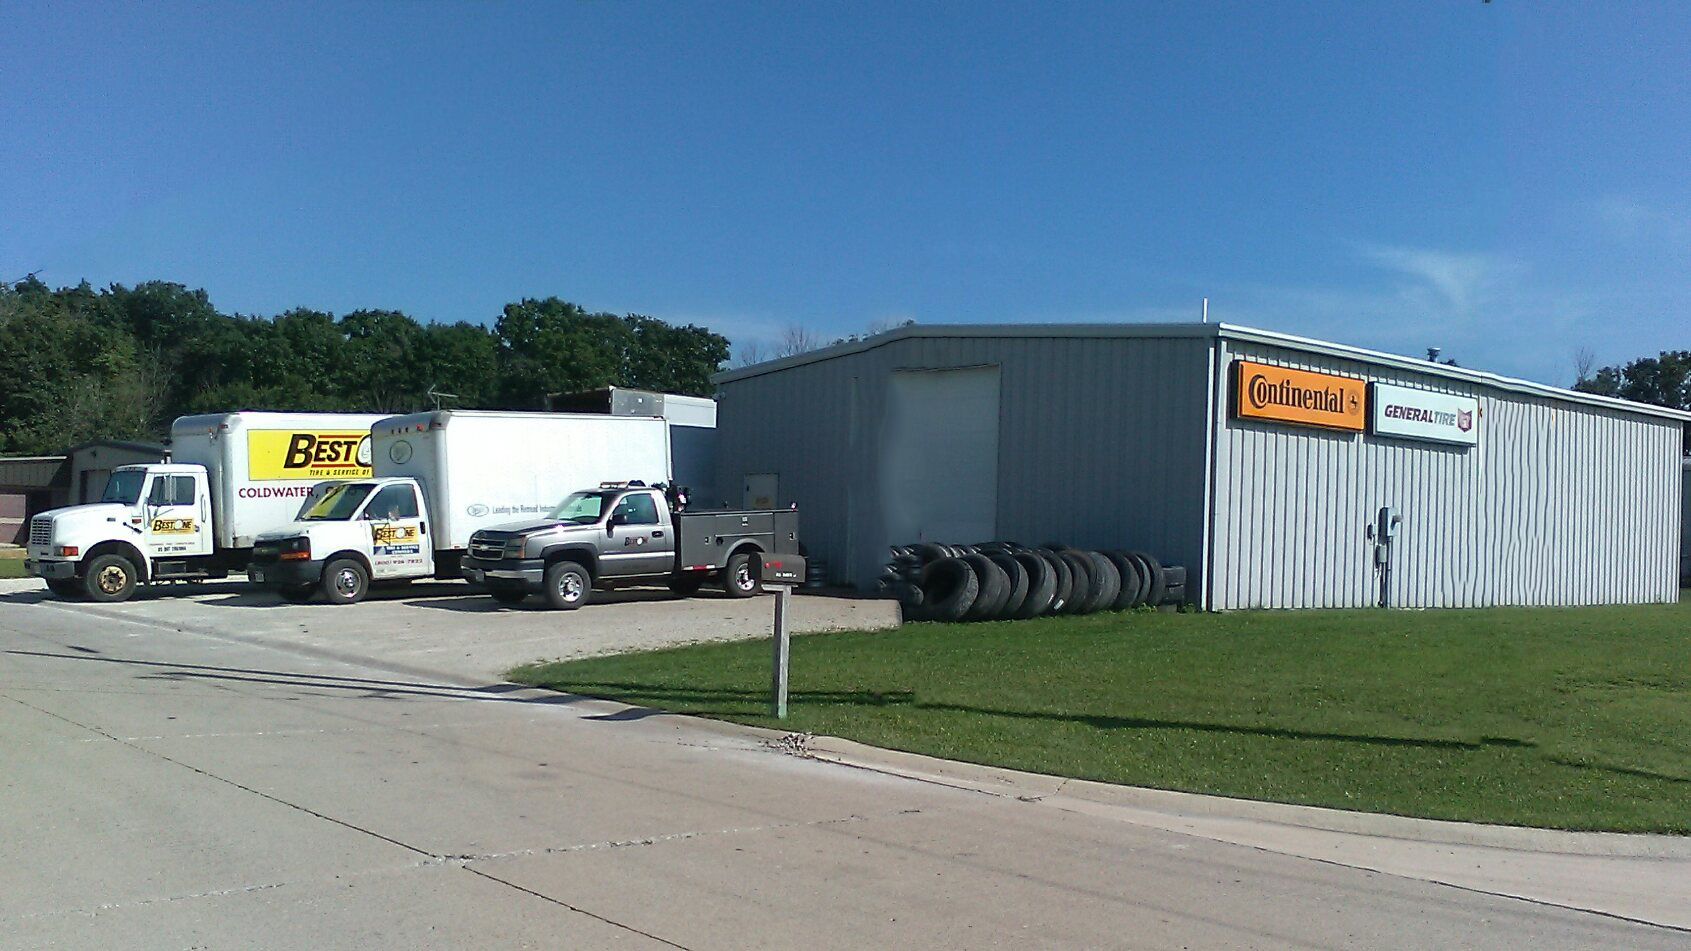 Best-One Tire & Service of Coldwater